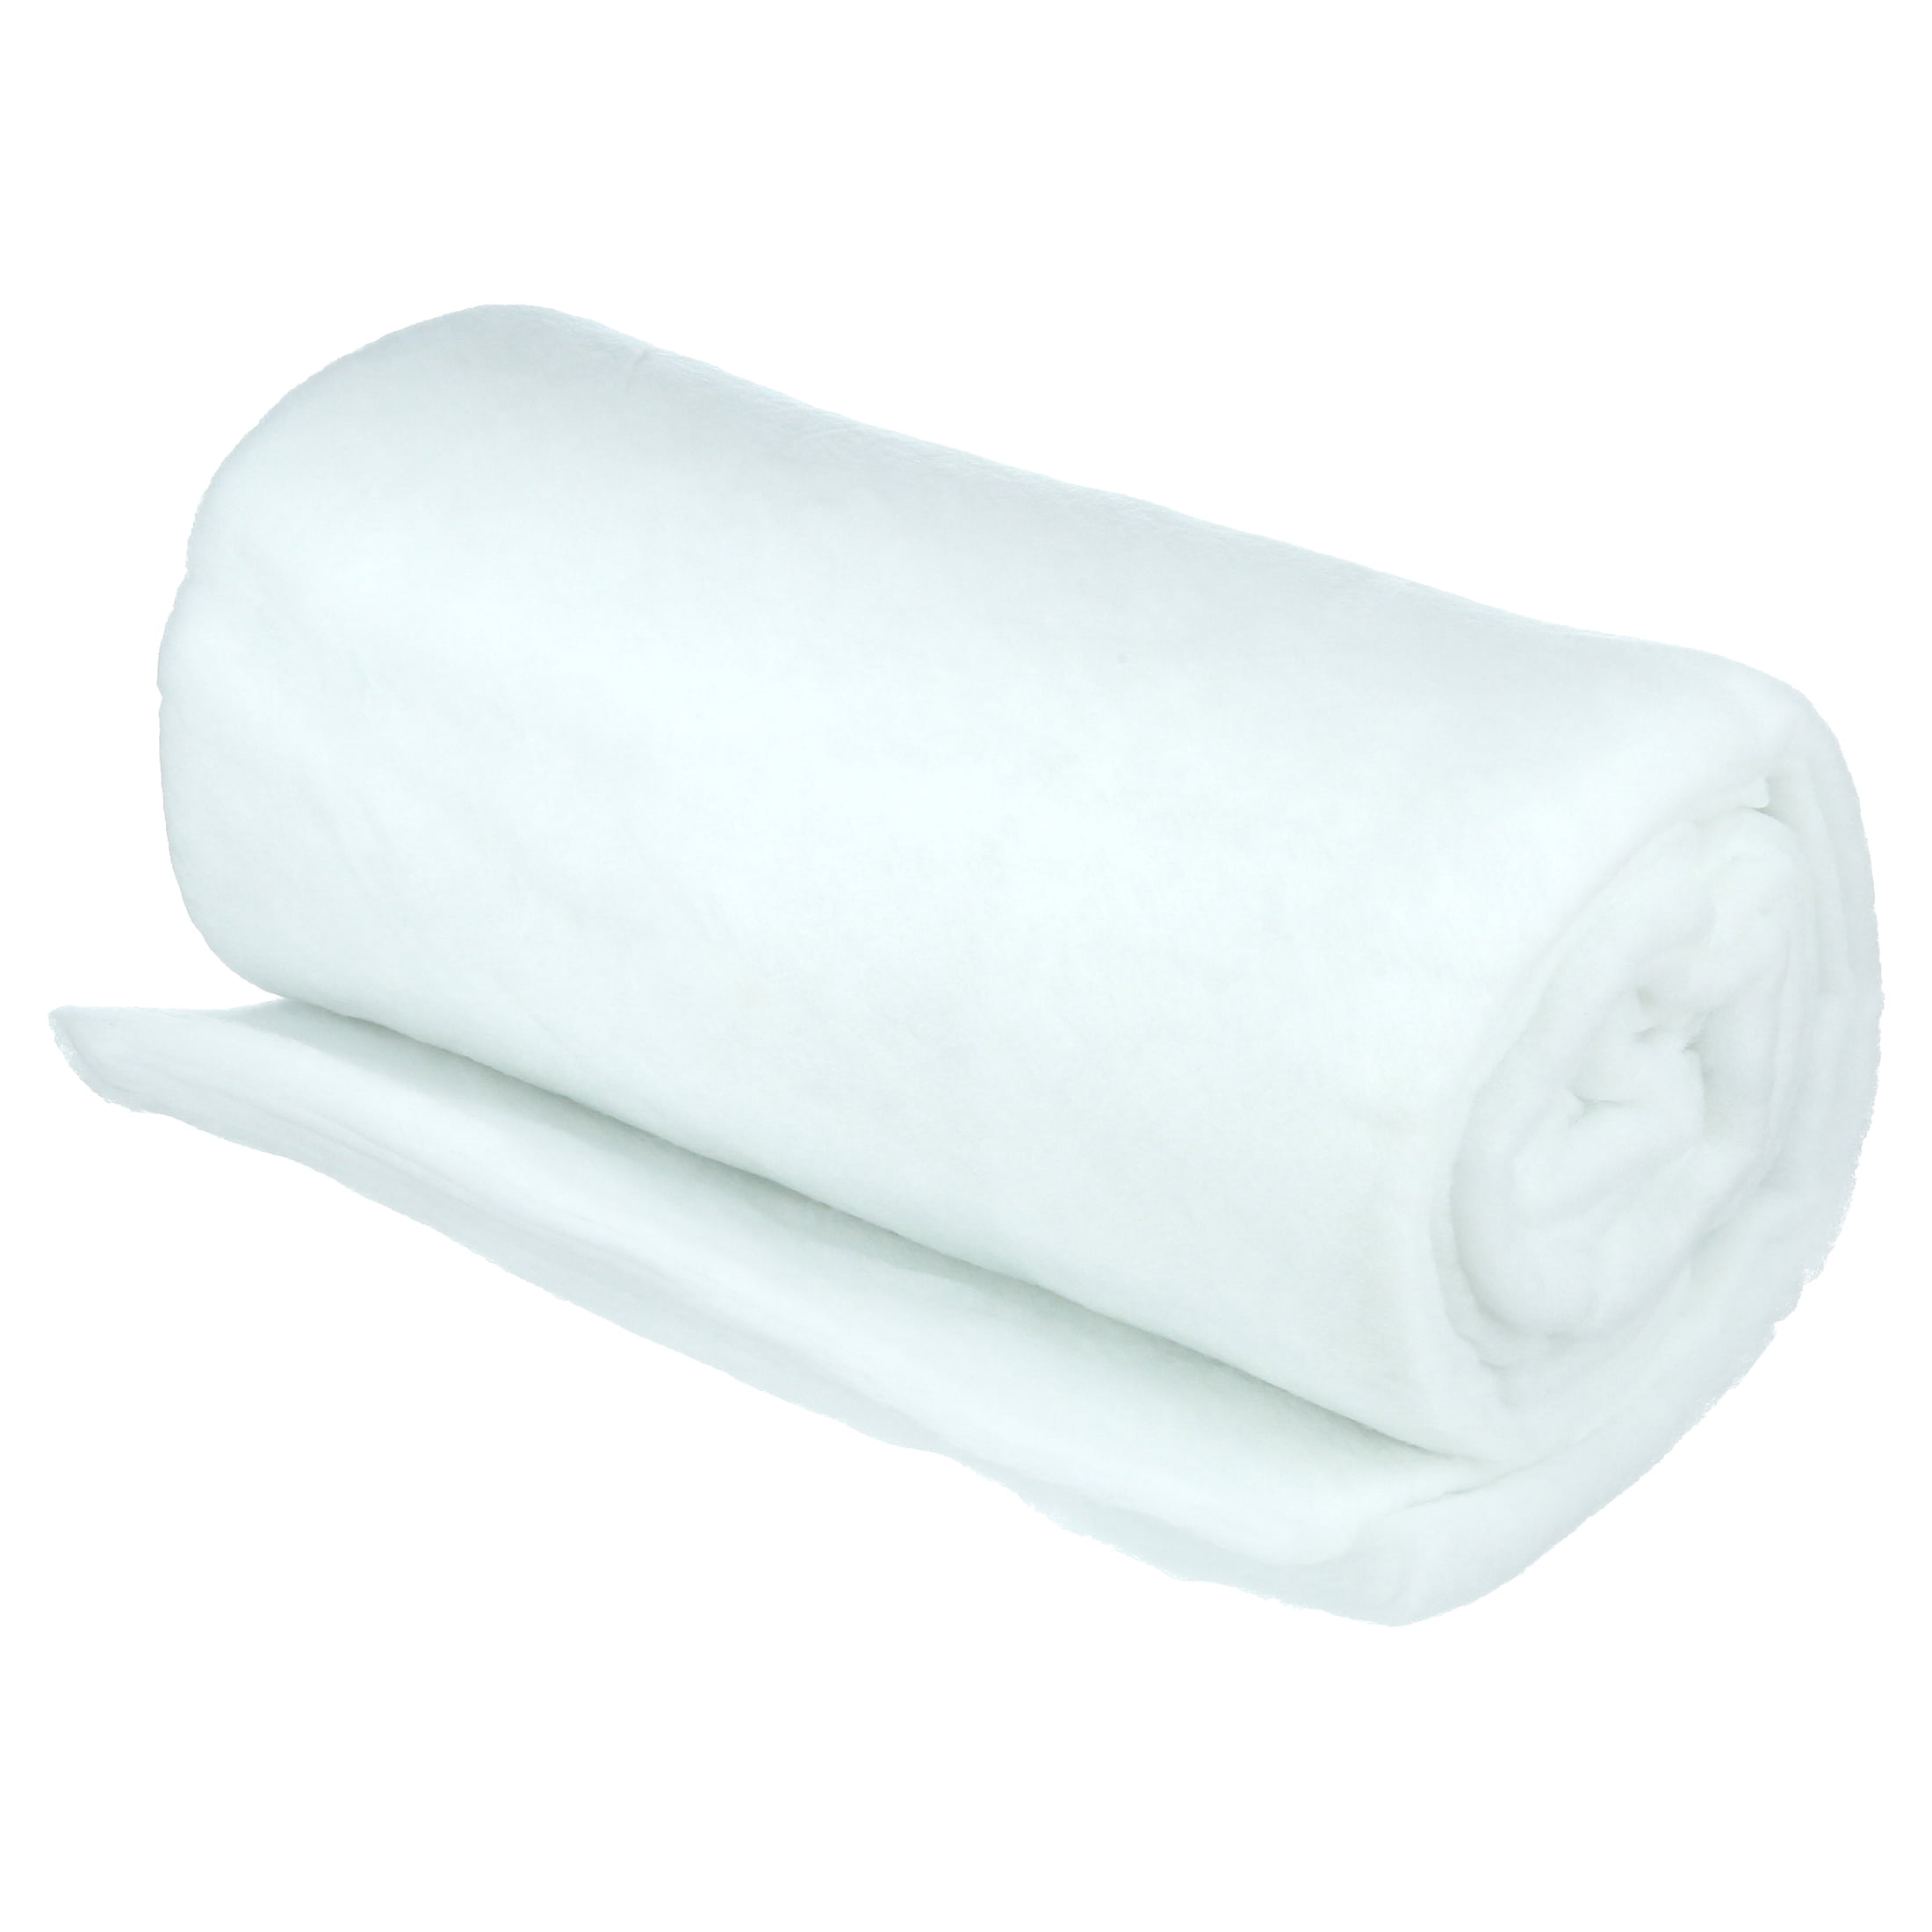 Poly-Fil Mid-Weight 100% Polyester Quilt Batting 96 inch x 15 Yard Roll, Size: 96x15yds, White